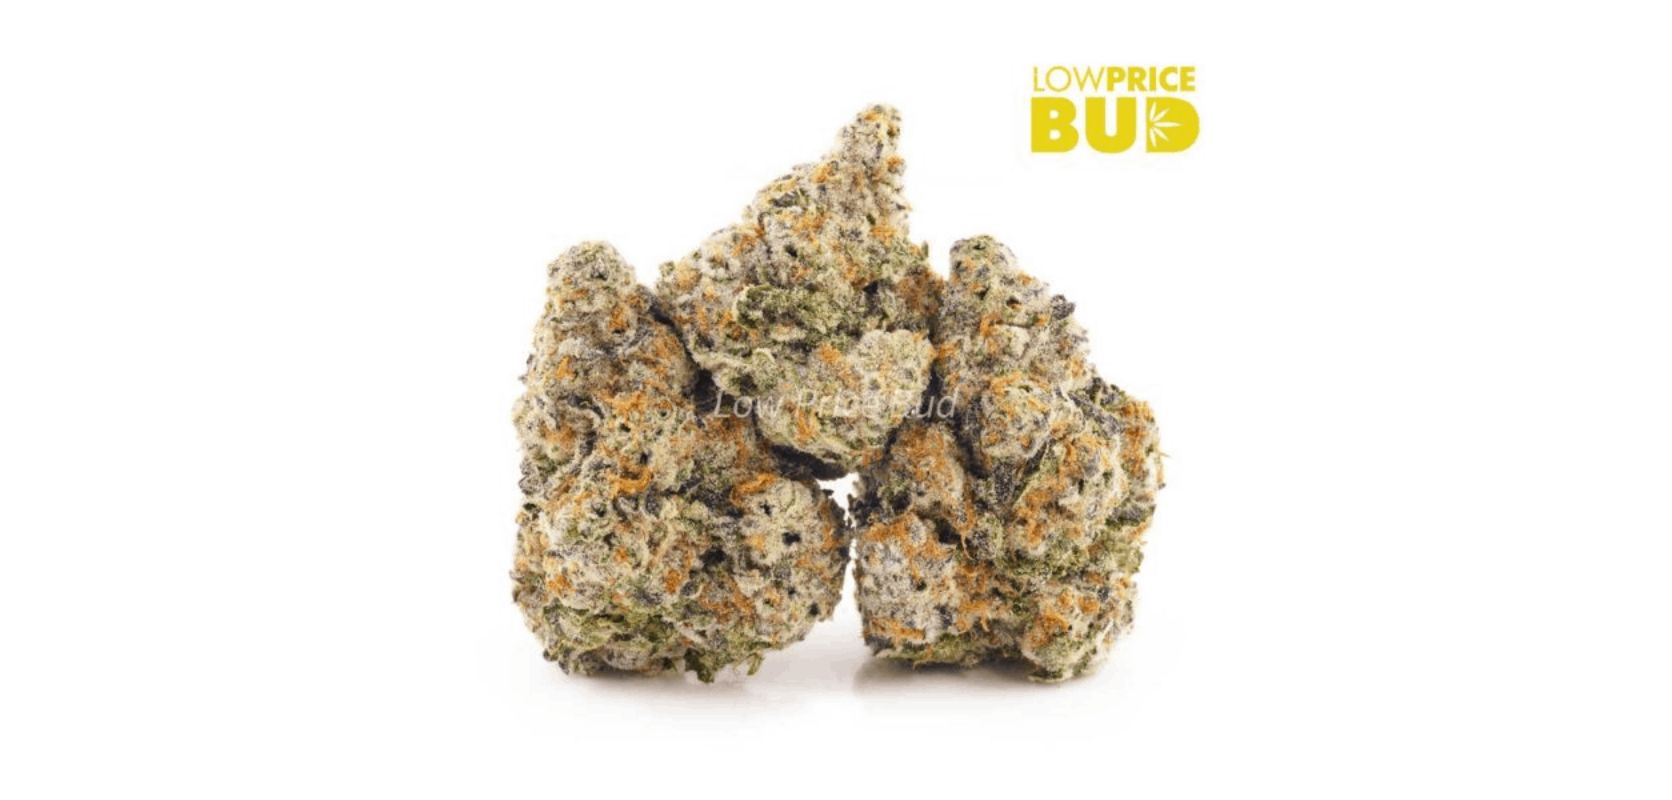 White Widow is classic, and it has an incredibly high THC level, reaching up to 25%. 